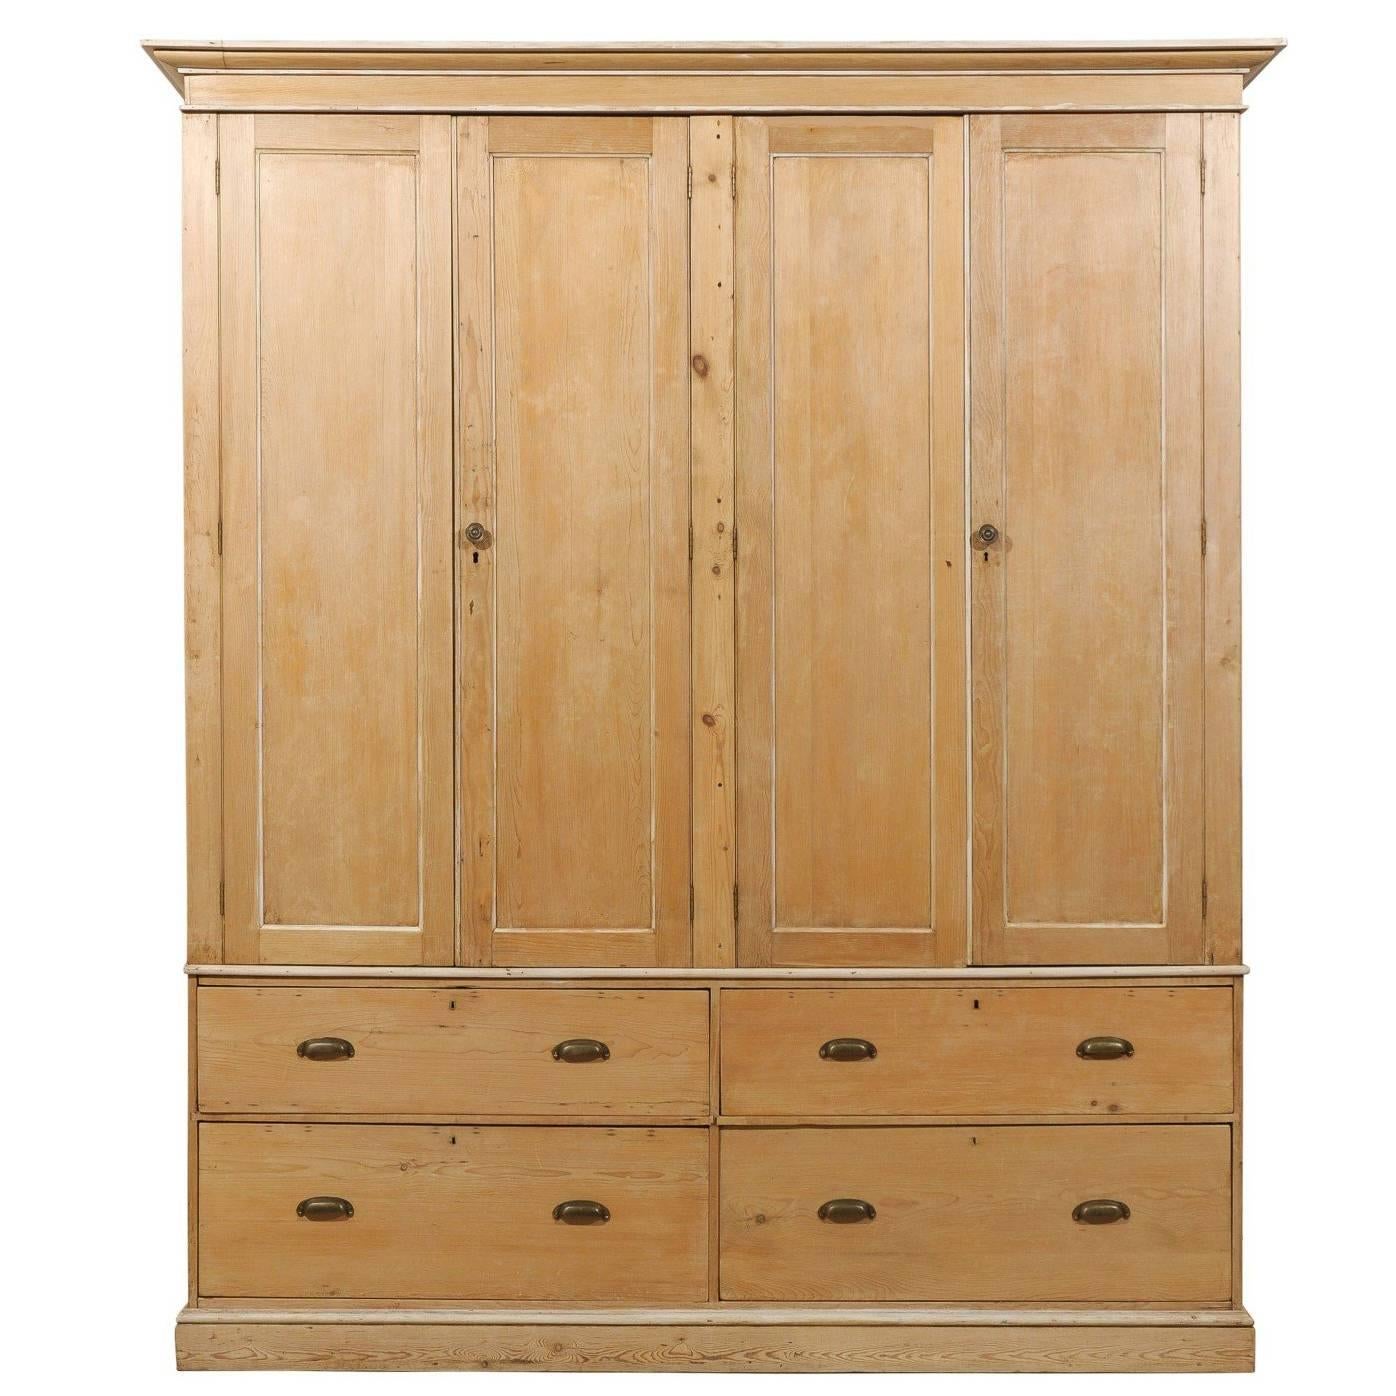 English Large-Size Natural Wood Storage Cabinet w/Drawers, Cleanly Designed